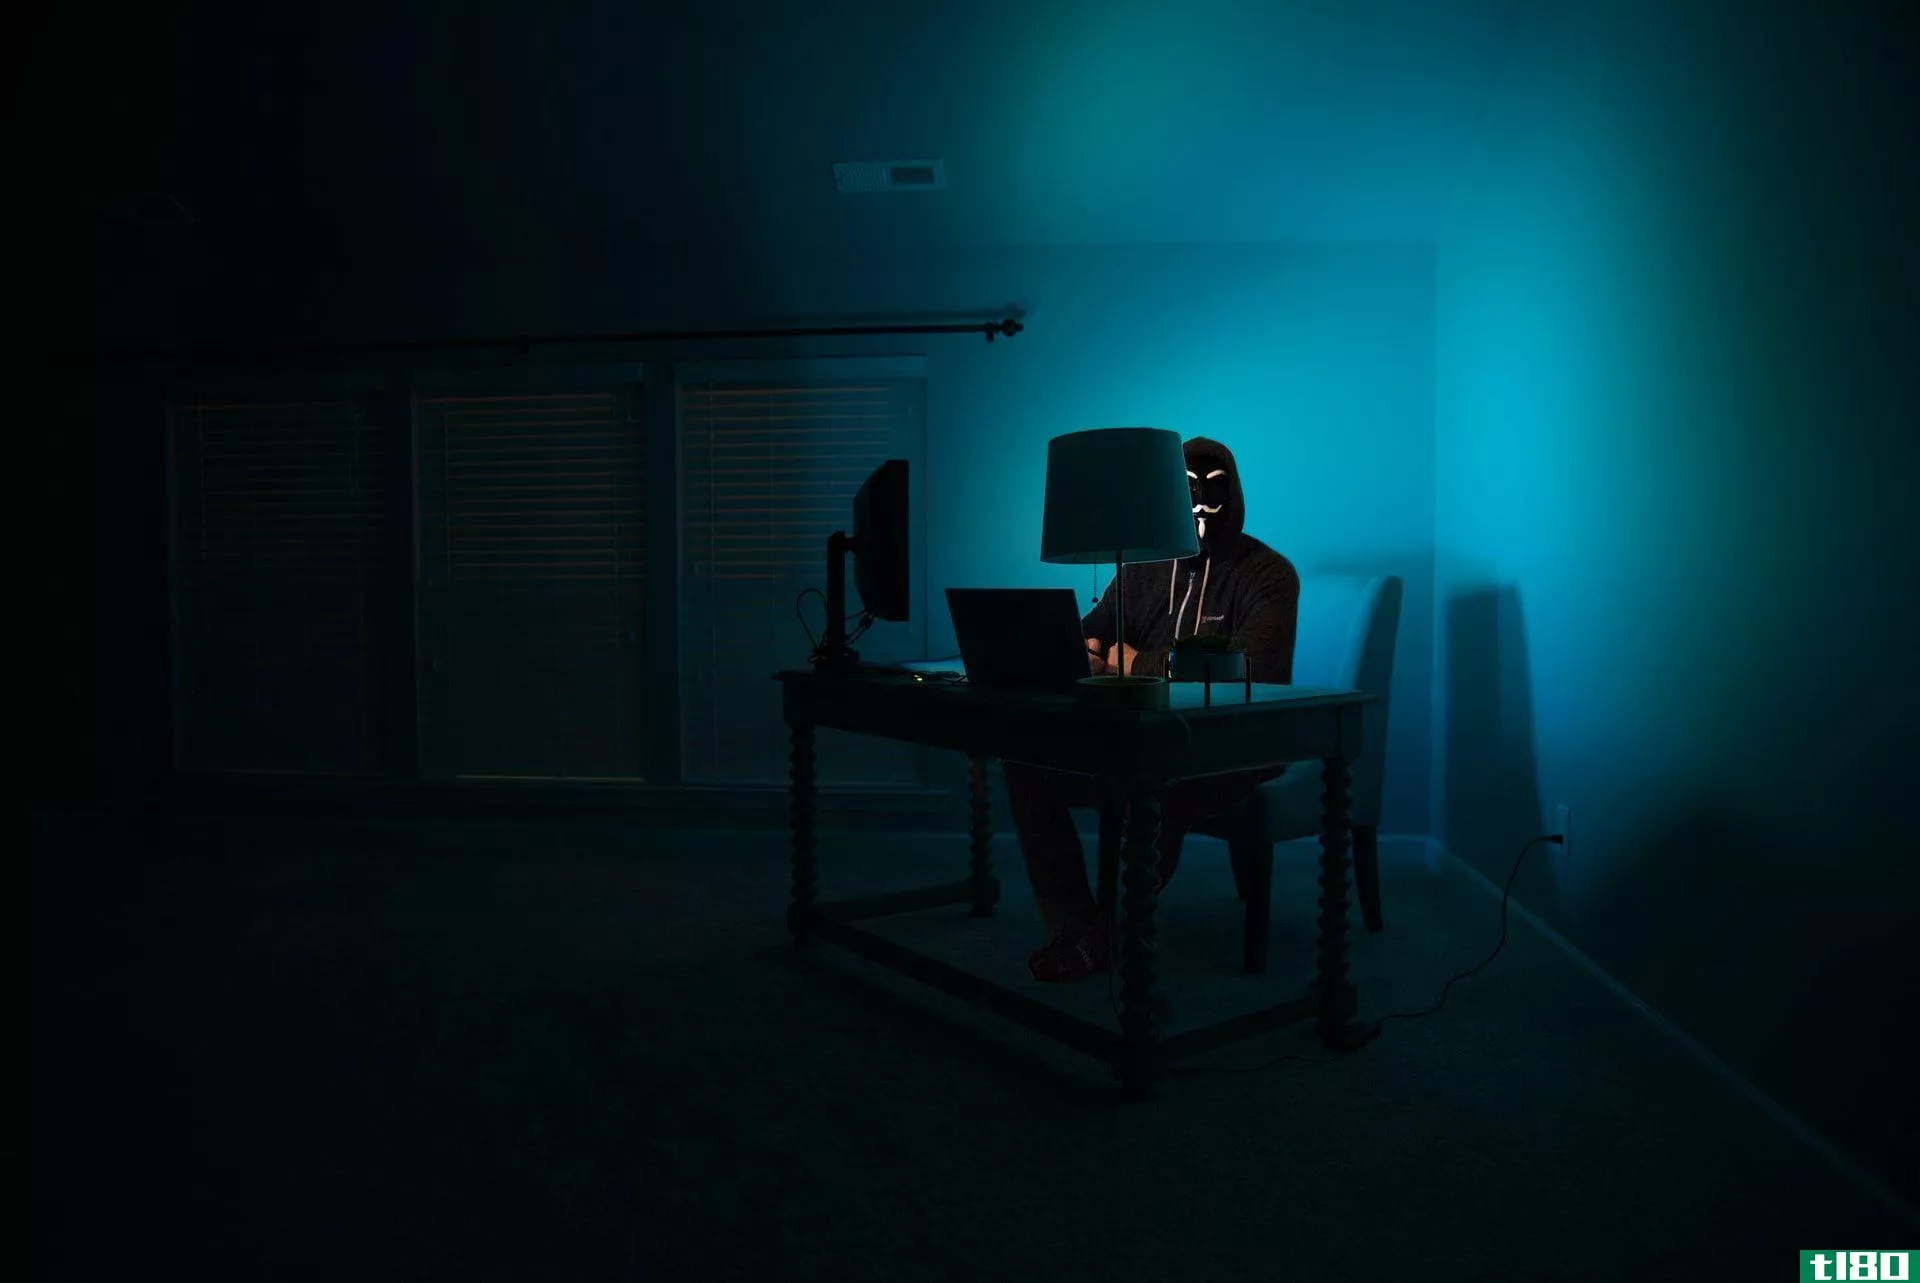 Stereotypical hacker in a dark room